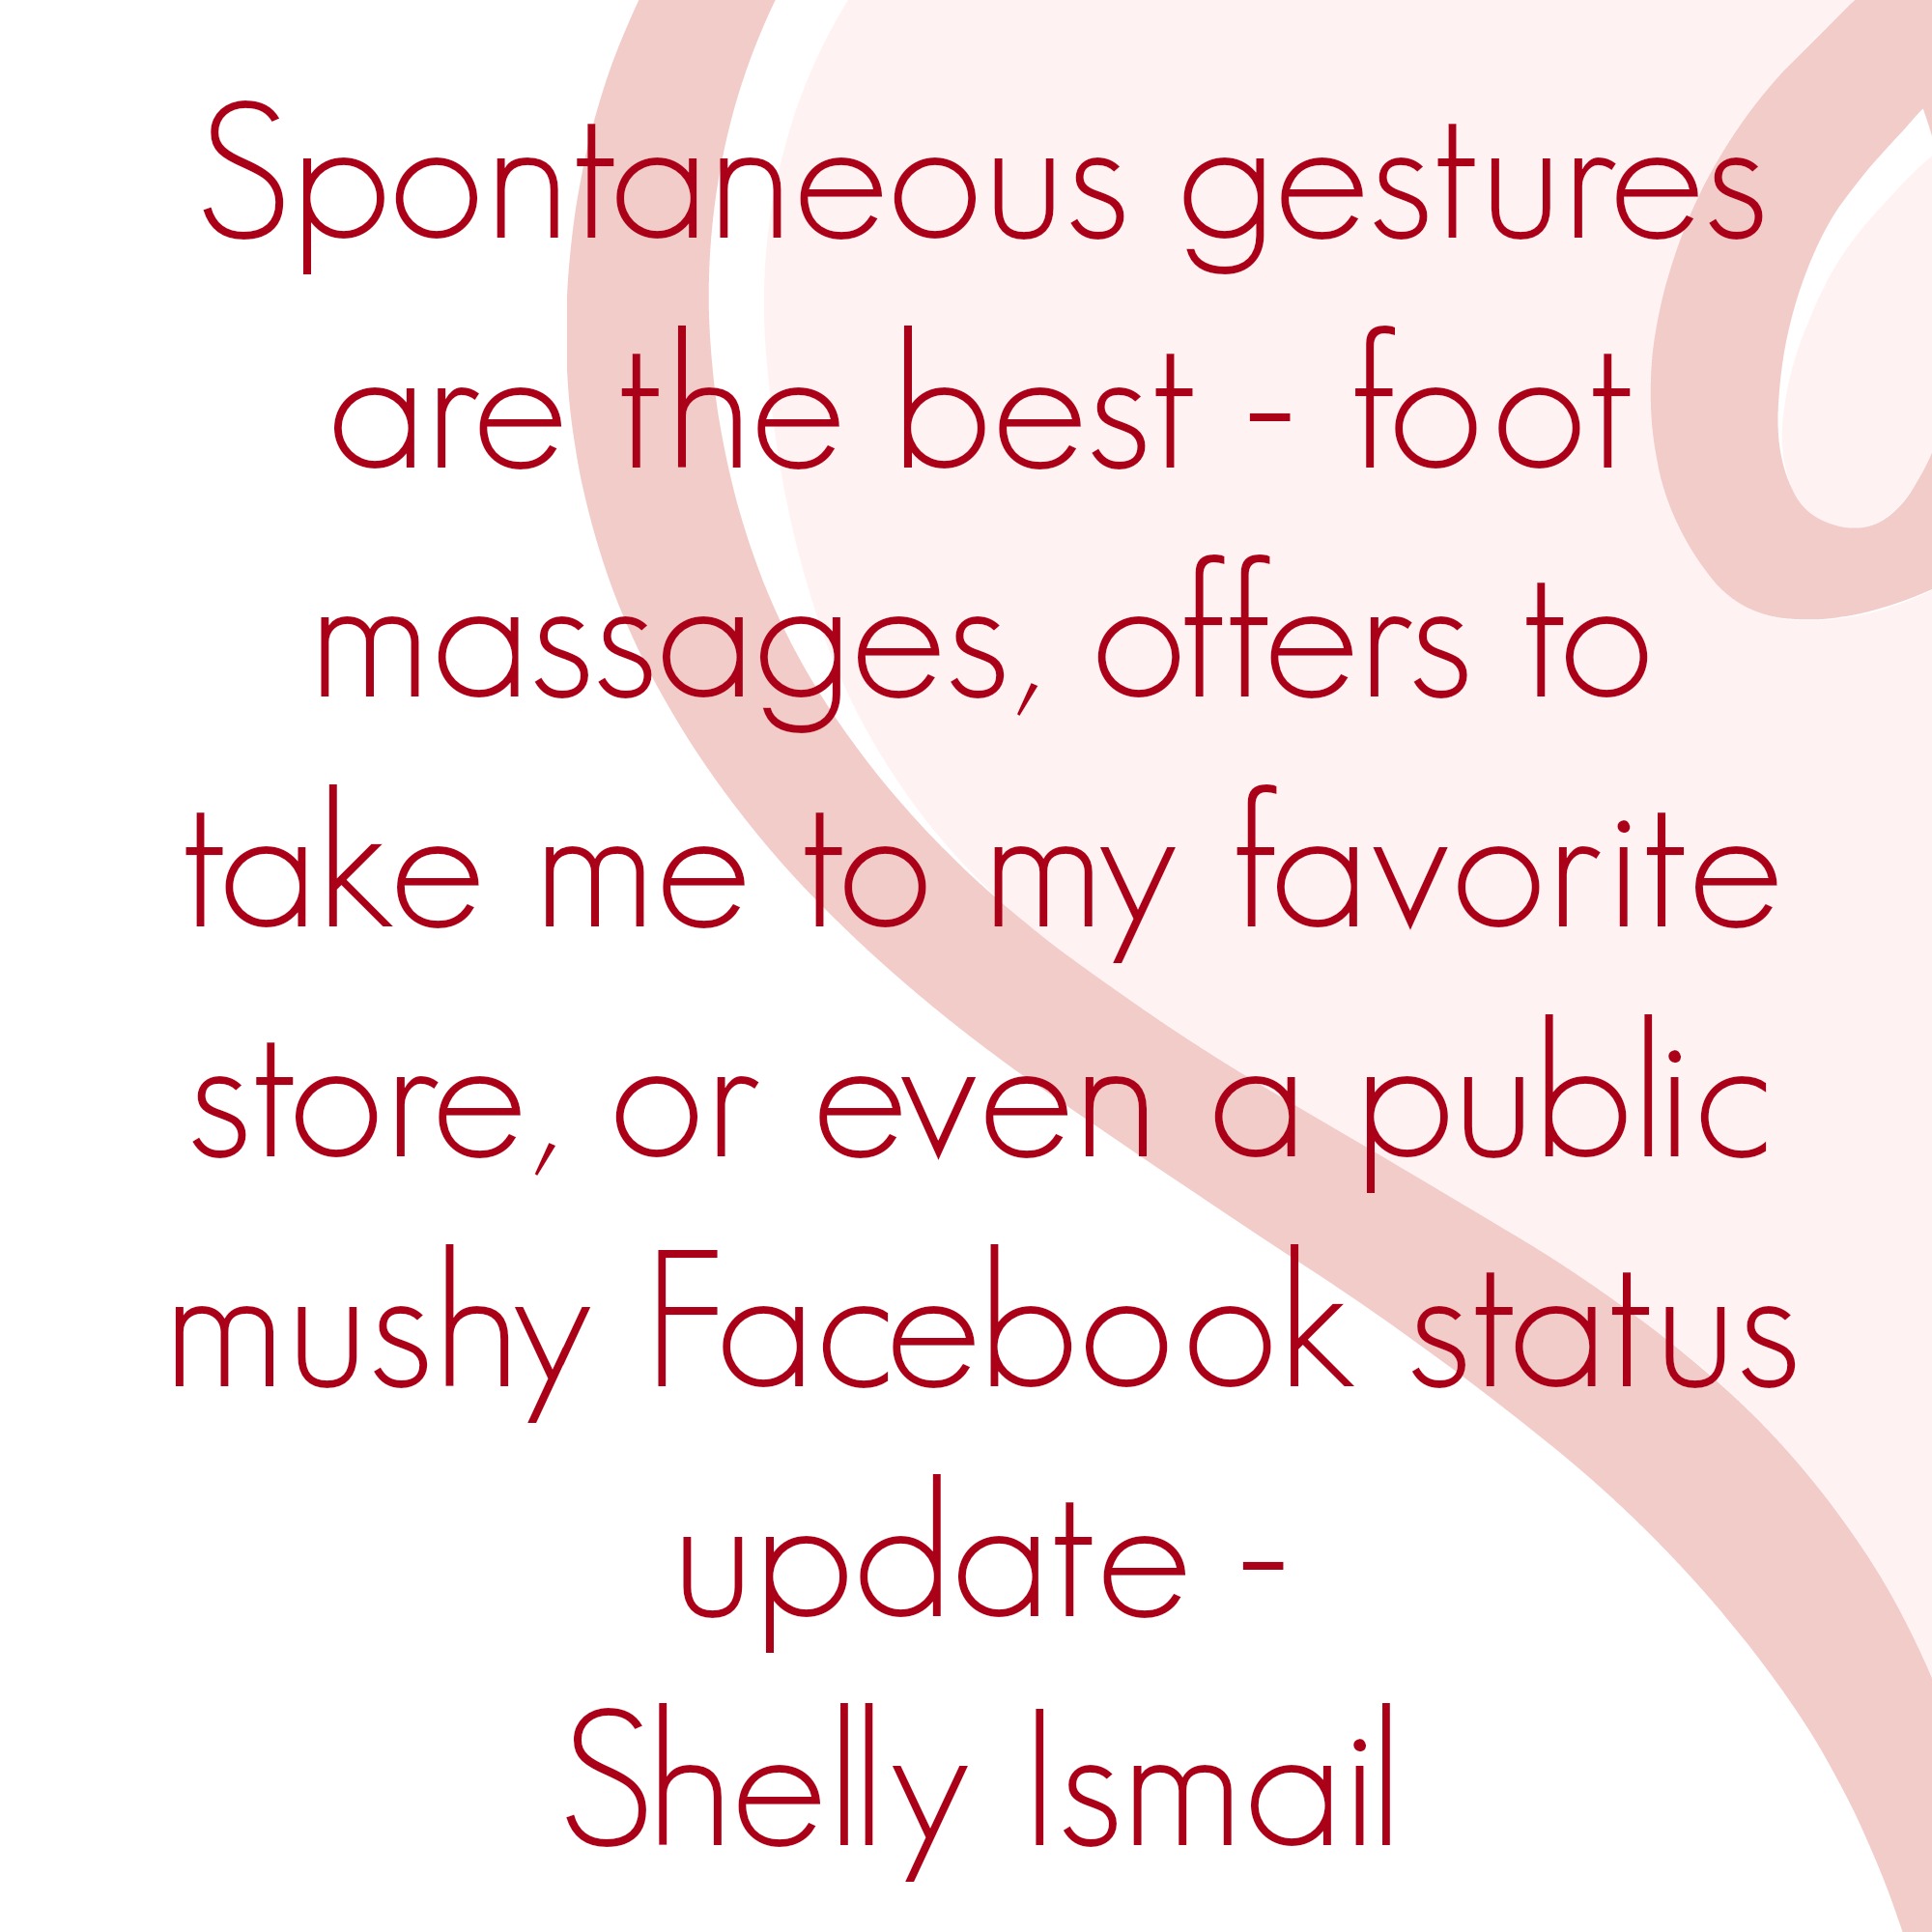 Spontaneous gestures are the best - foot massages, offers to take me to my favorite store, or even a public mushy Facebook status update.